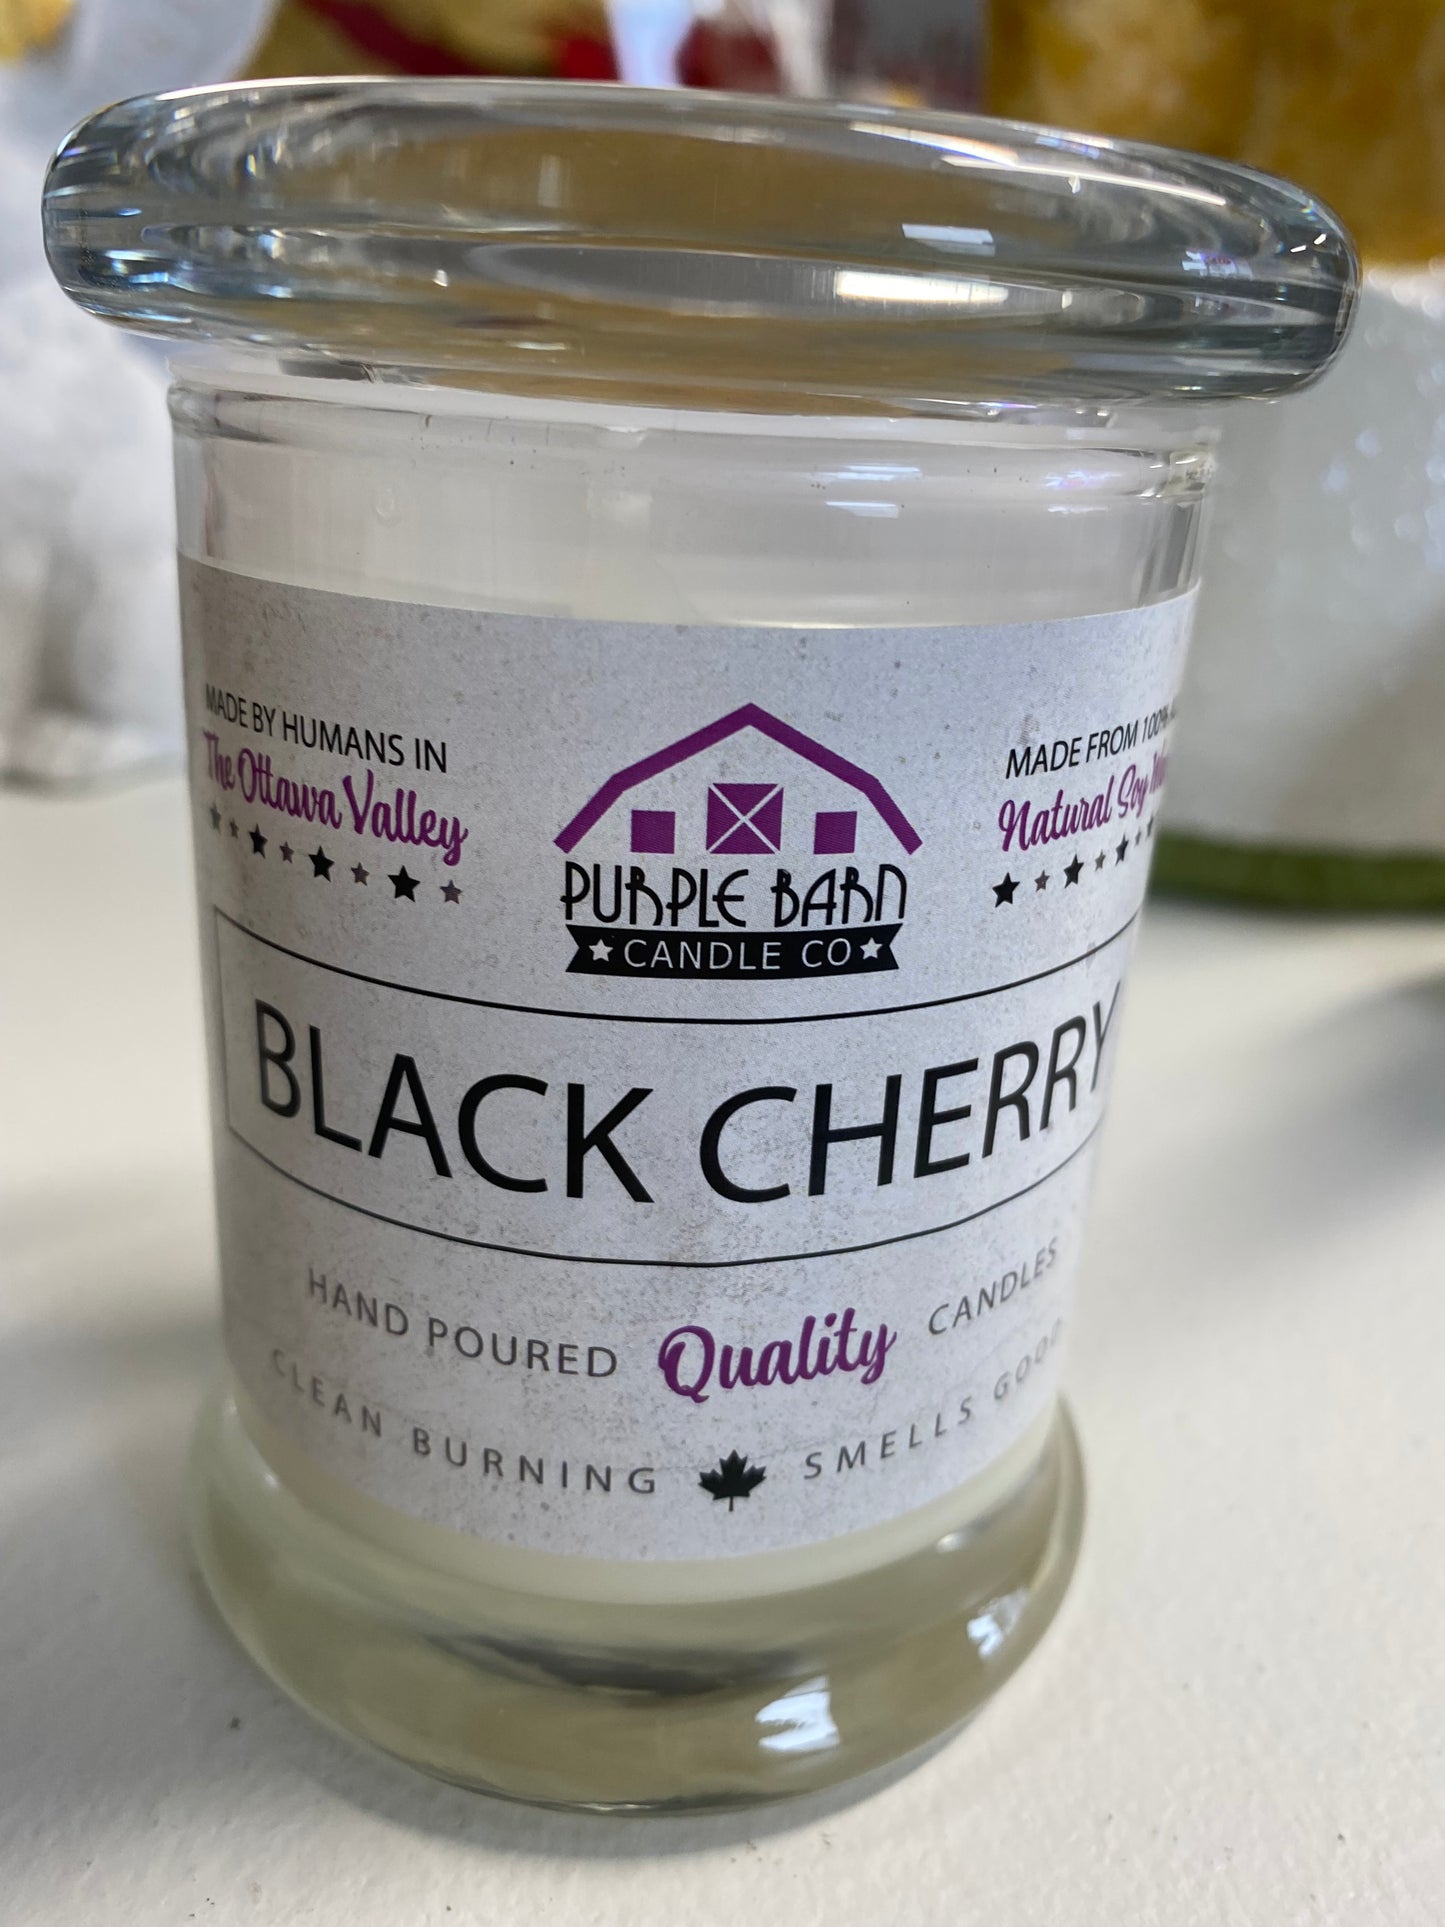 Purple Barn Candle Company, Black Cherry Soy Candle 20 Ounce